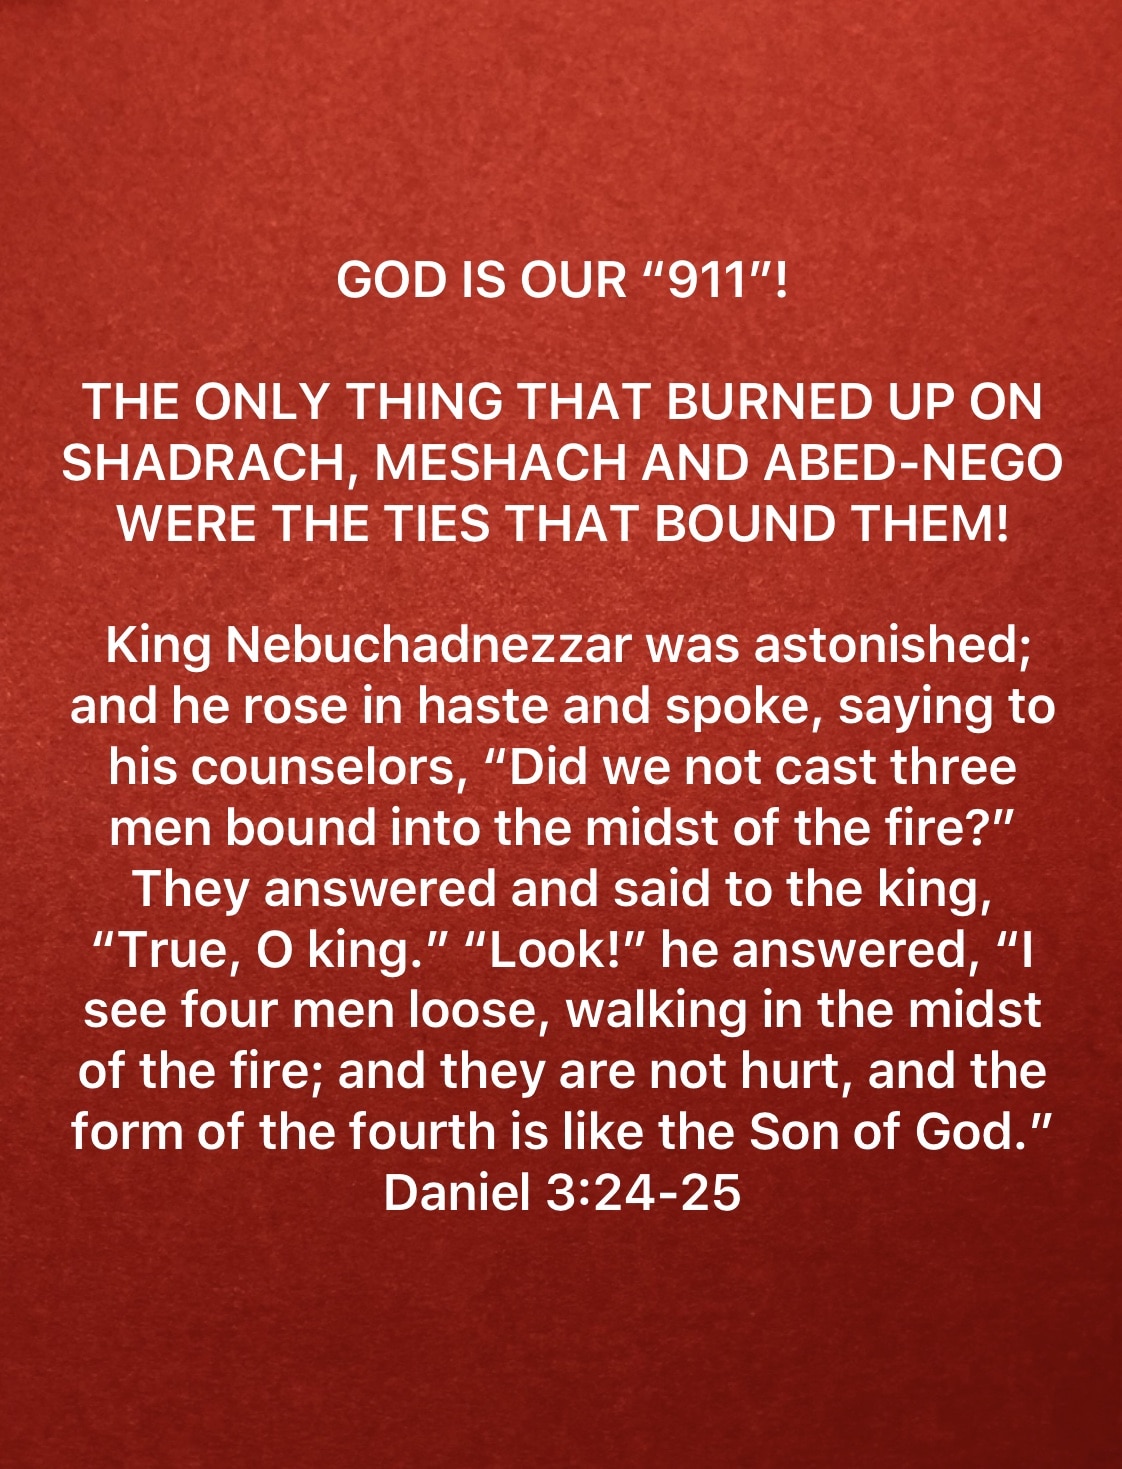 “GOD IS OUR 911!”